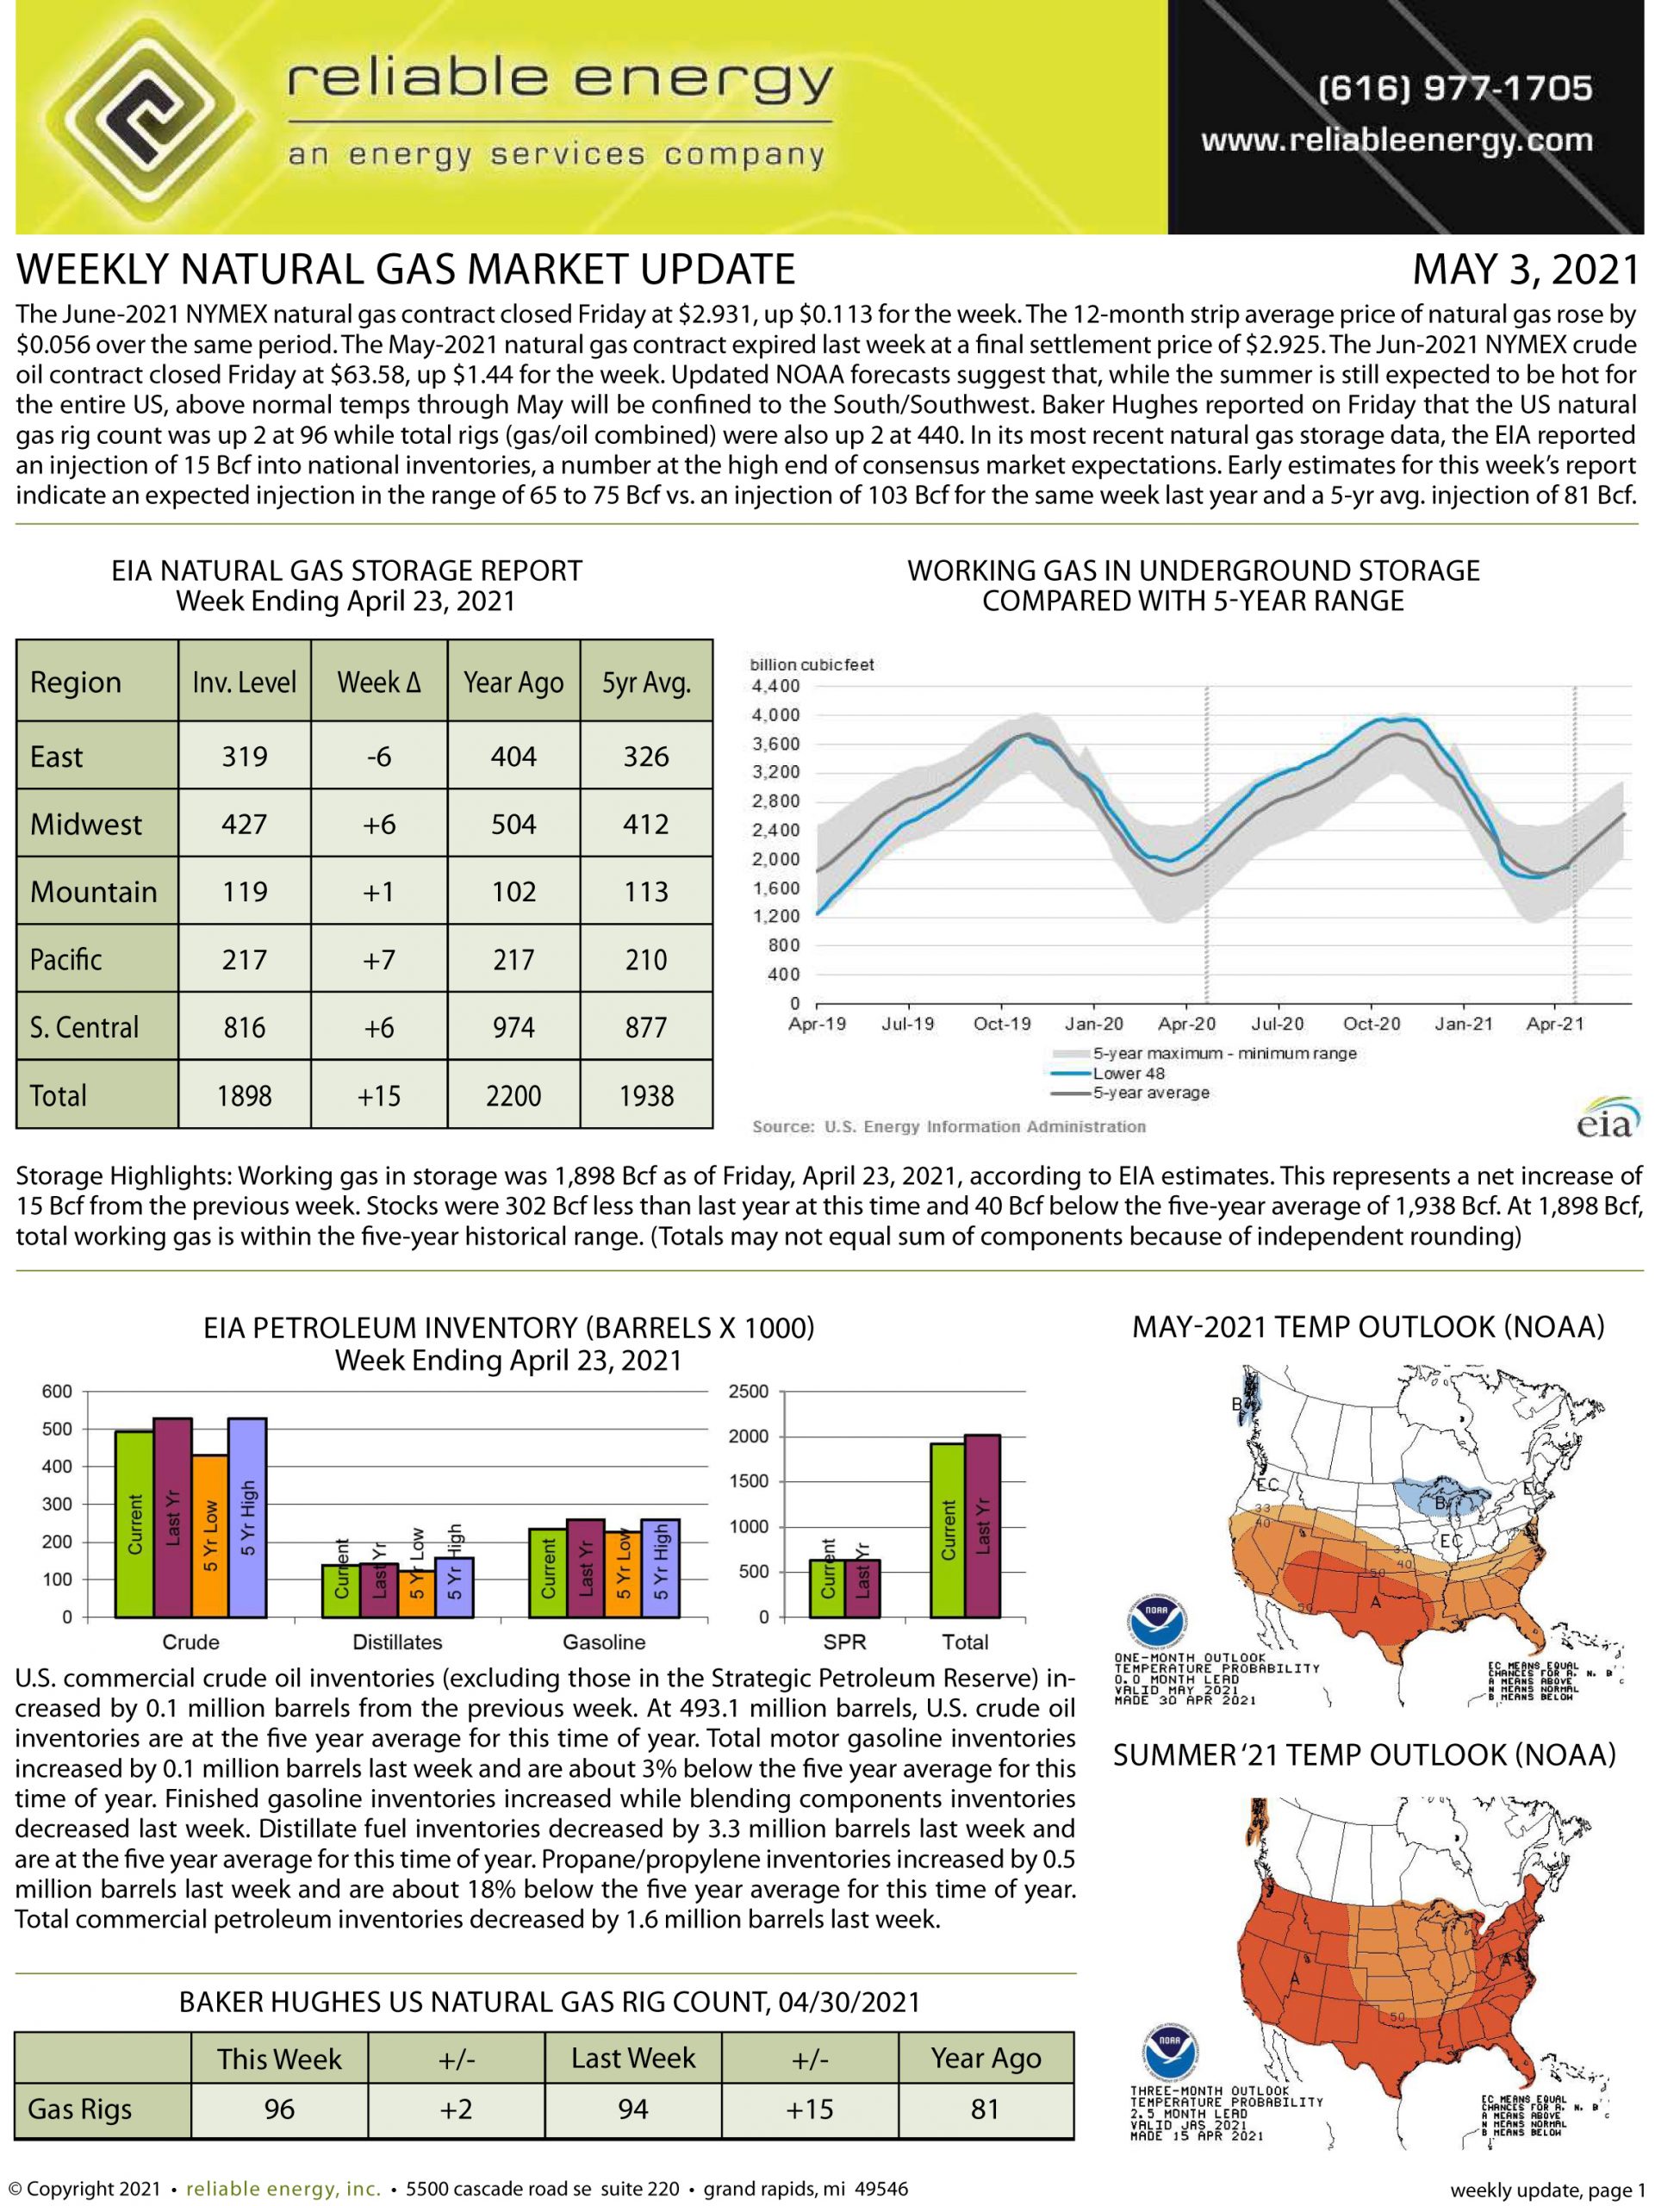 Natural Gas Market Update – May 3, 2021